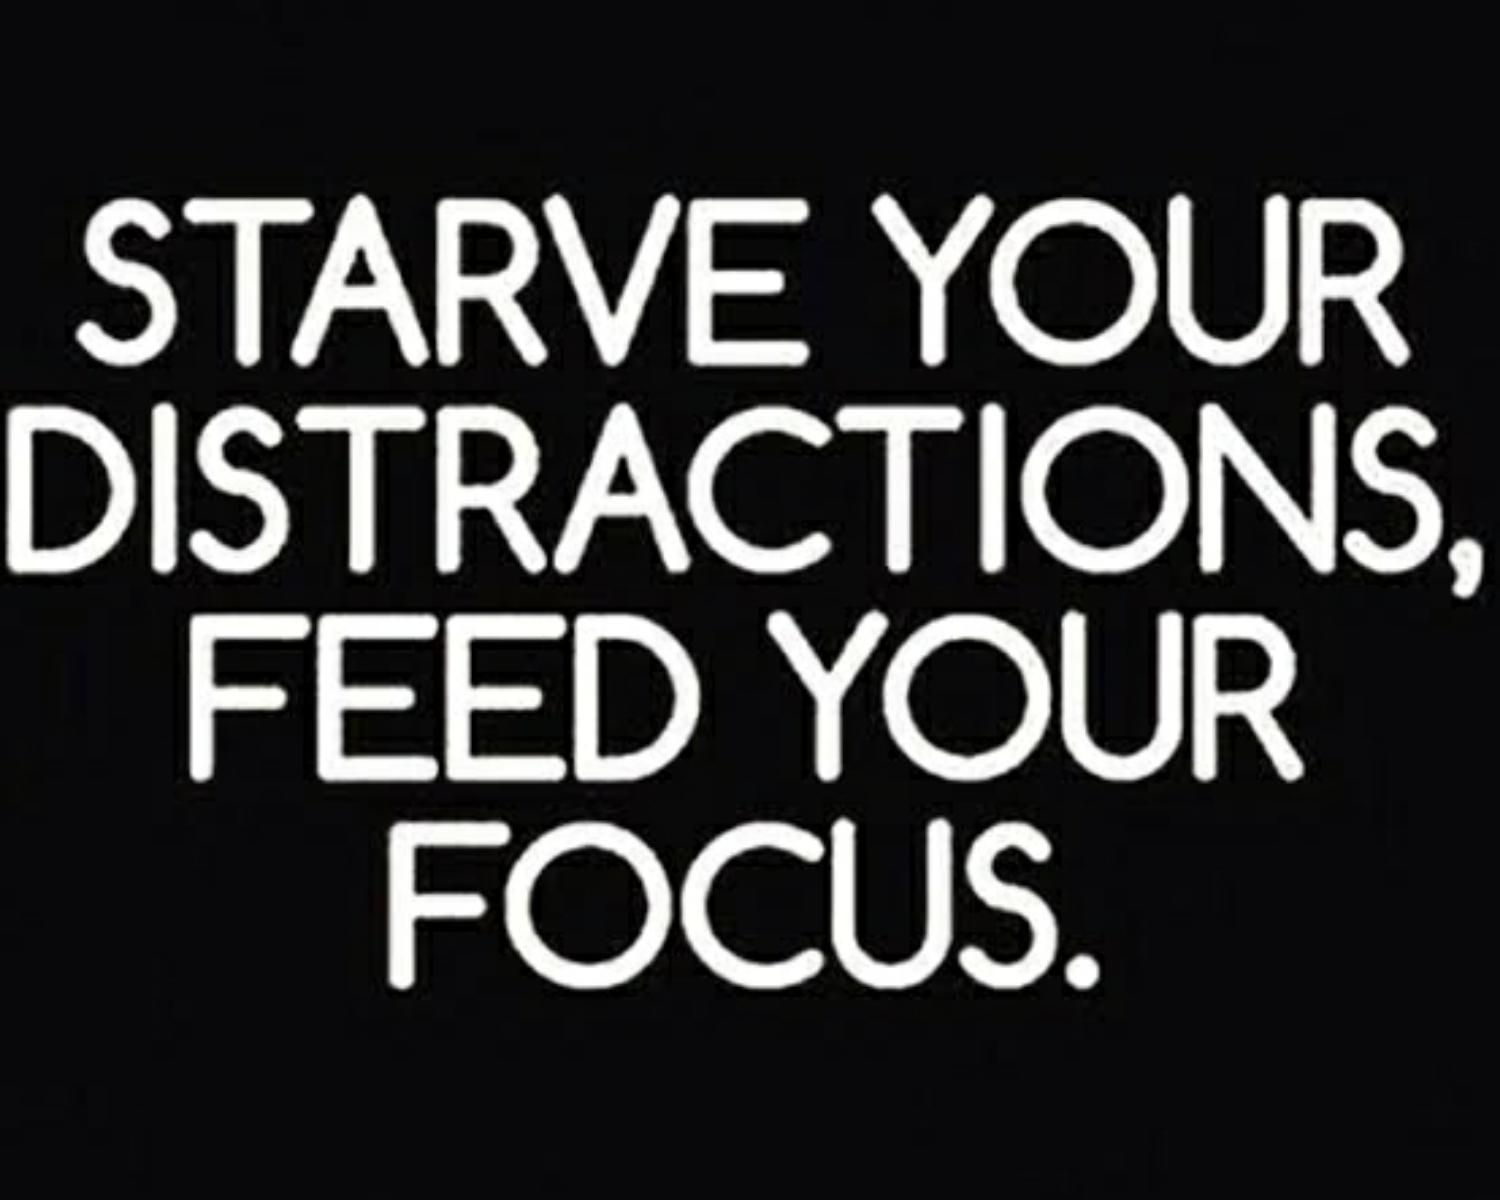 2. Cut out distractions 